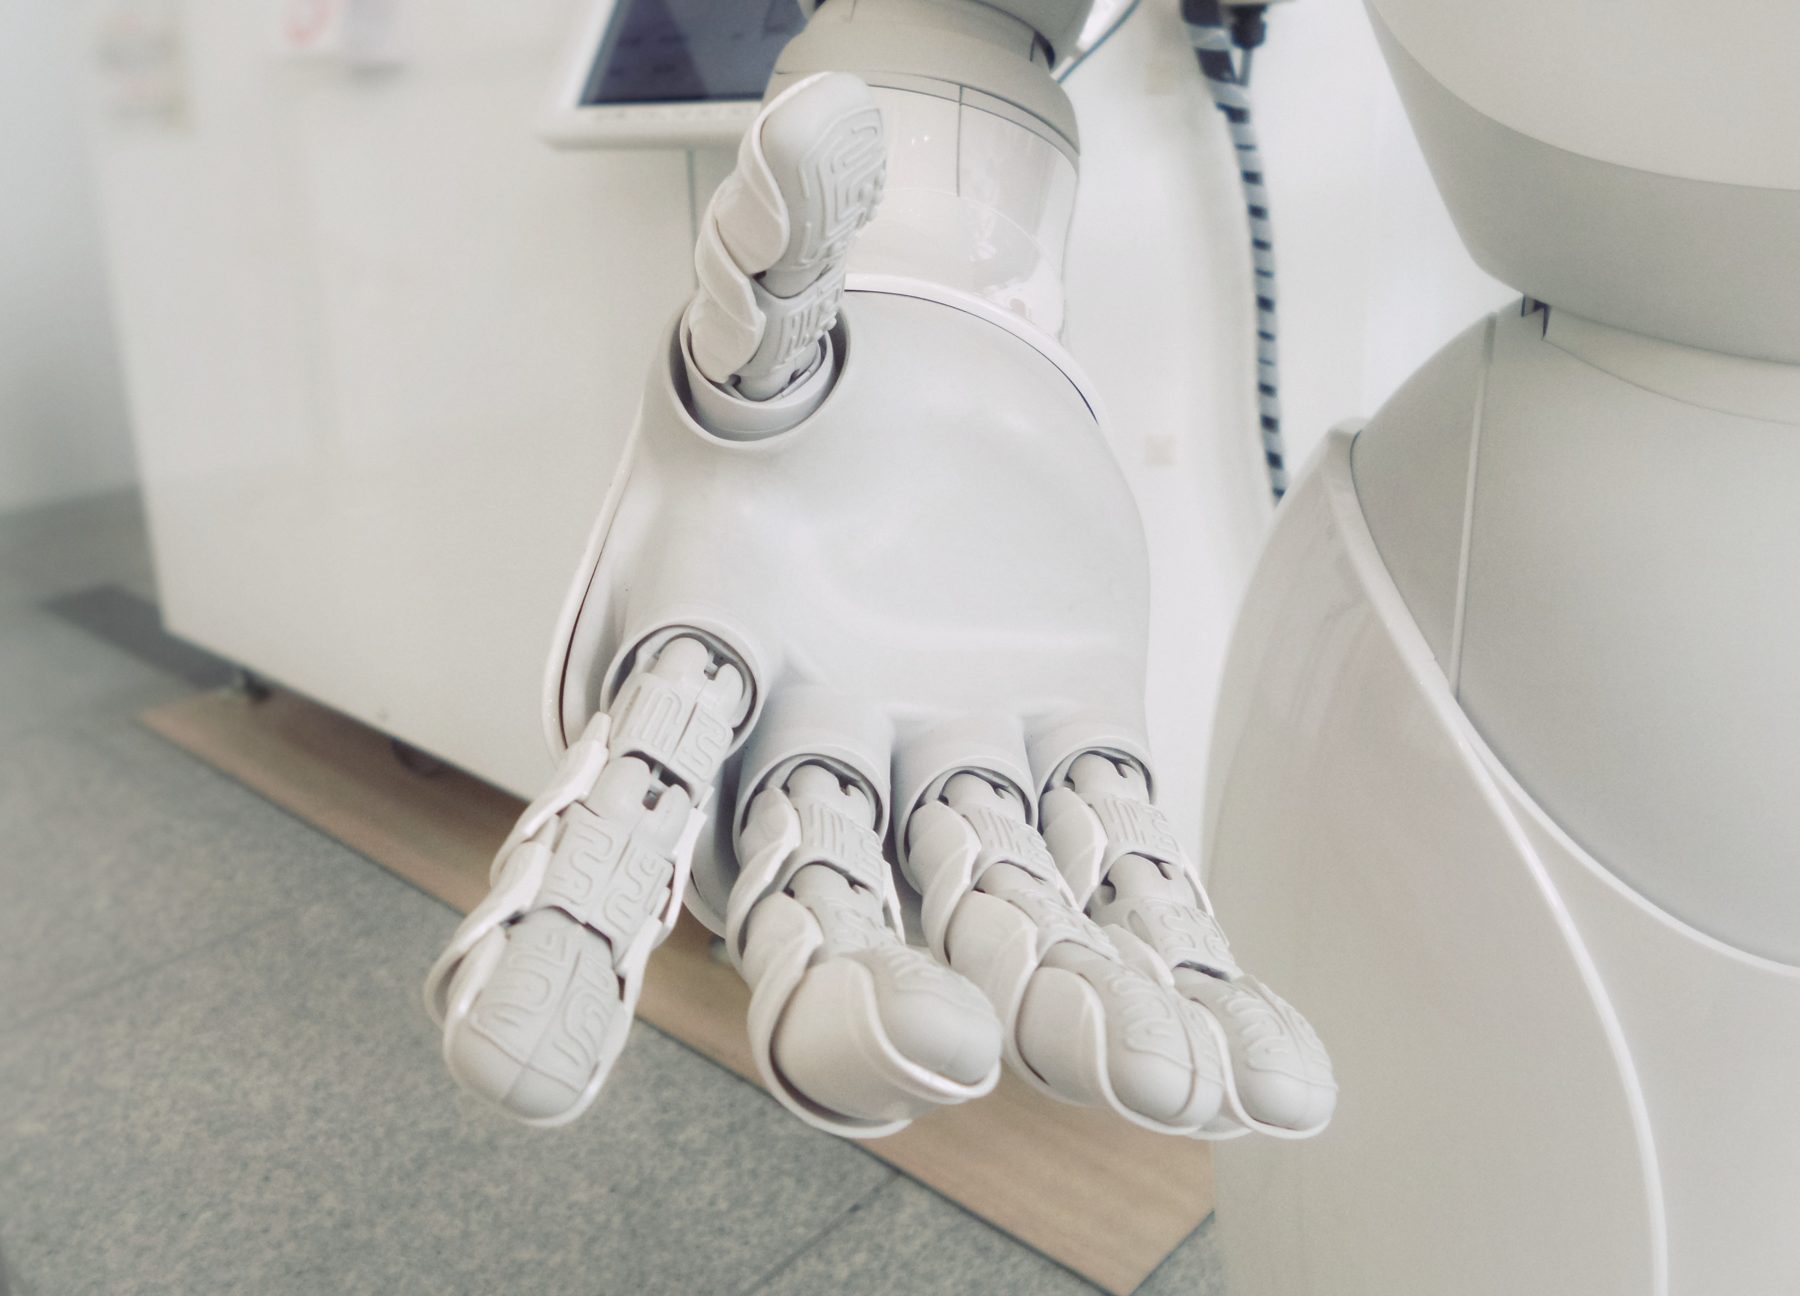 A robot extending its hand to the viewer.